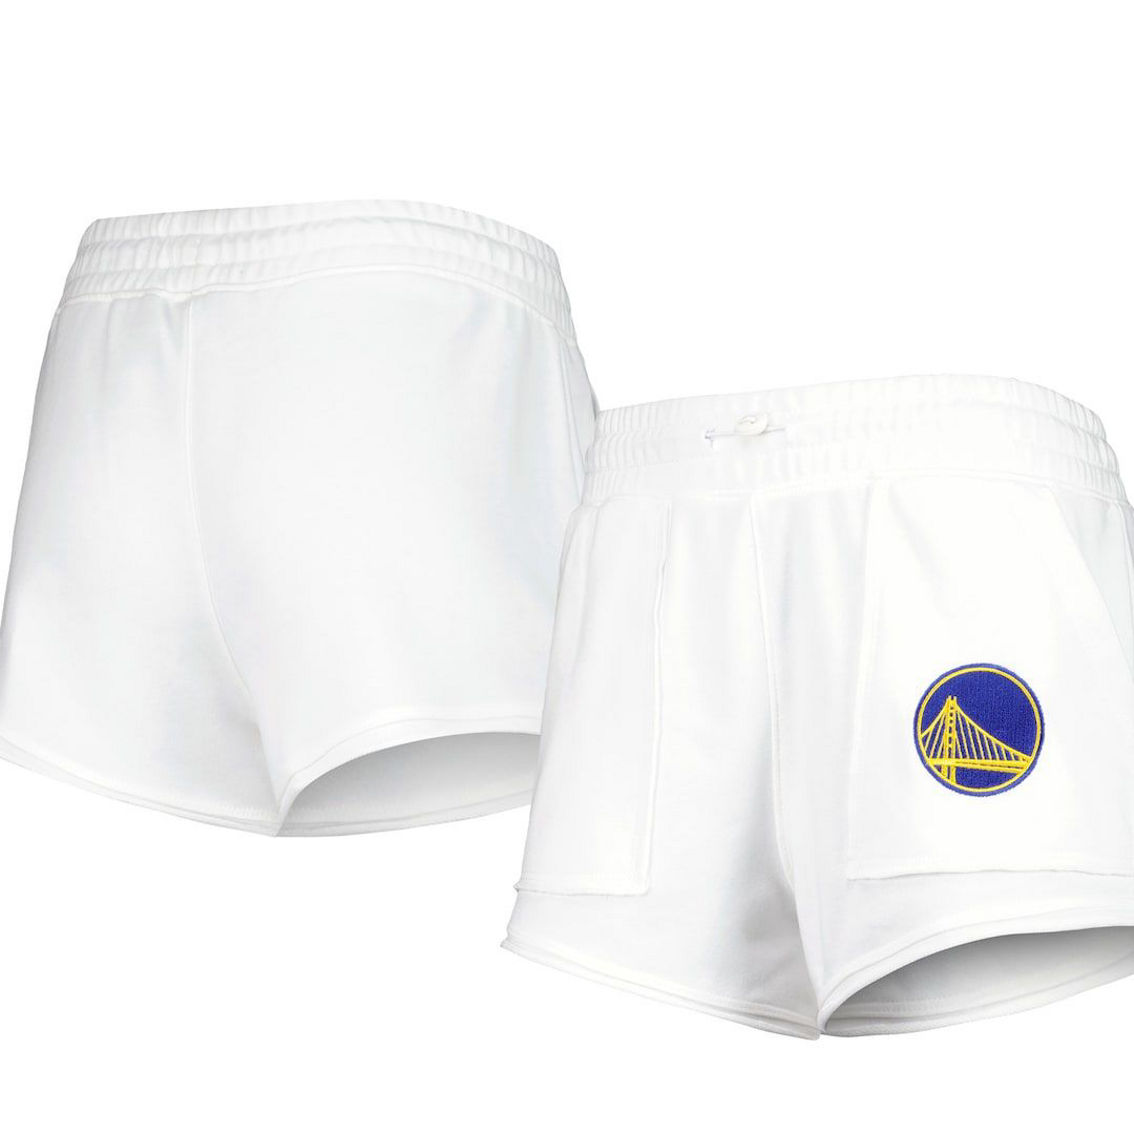 Concepts Sport Women's White Golden State Warriors Sunray Shorts - Image 2 of 4